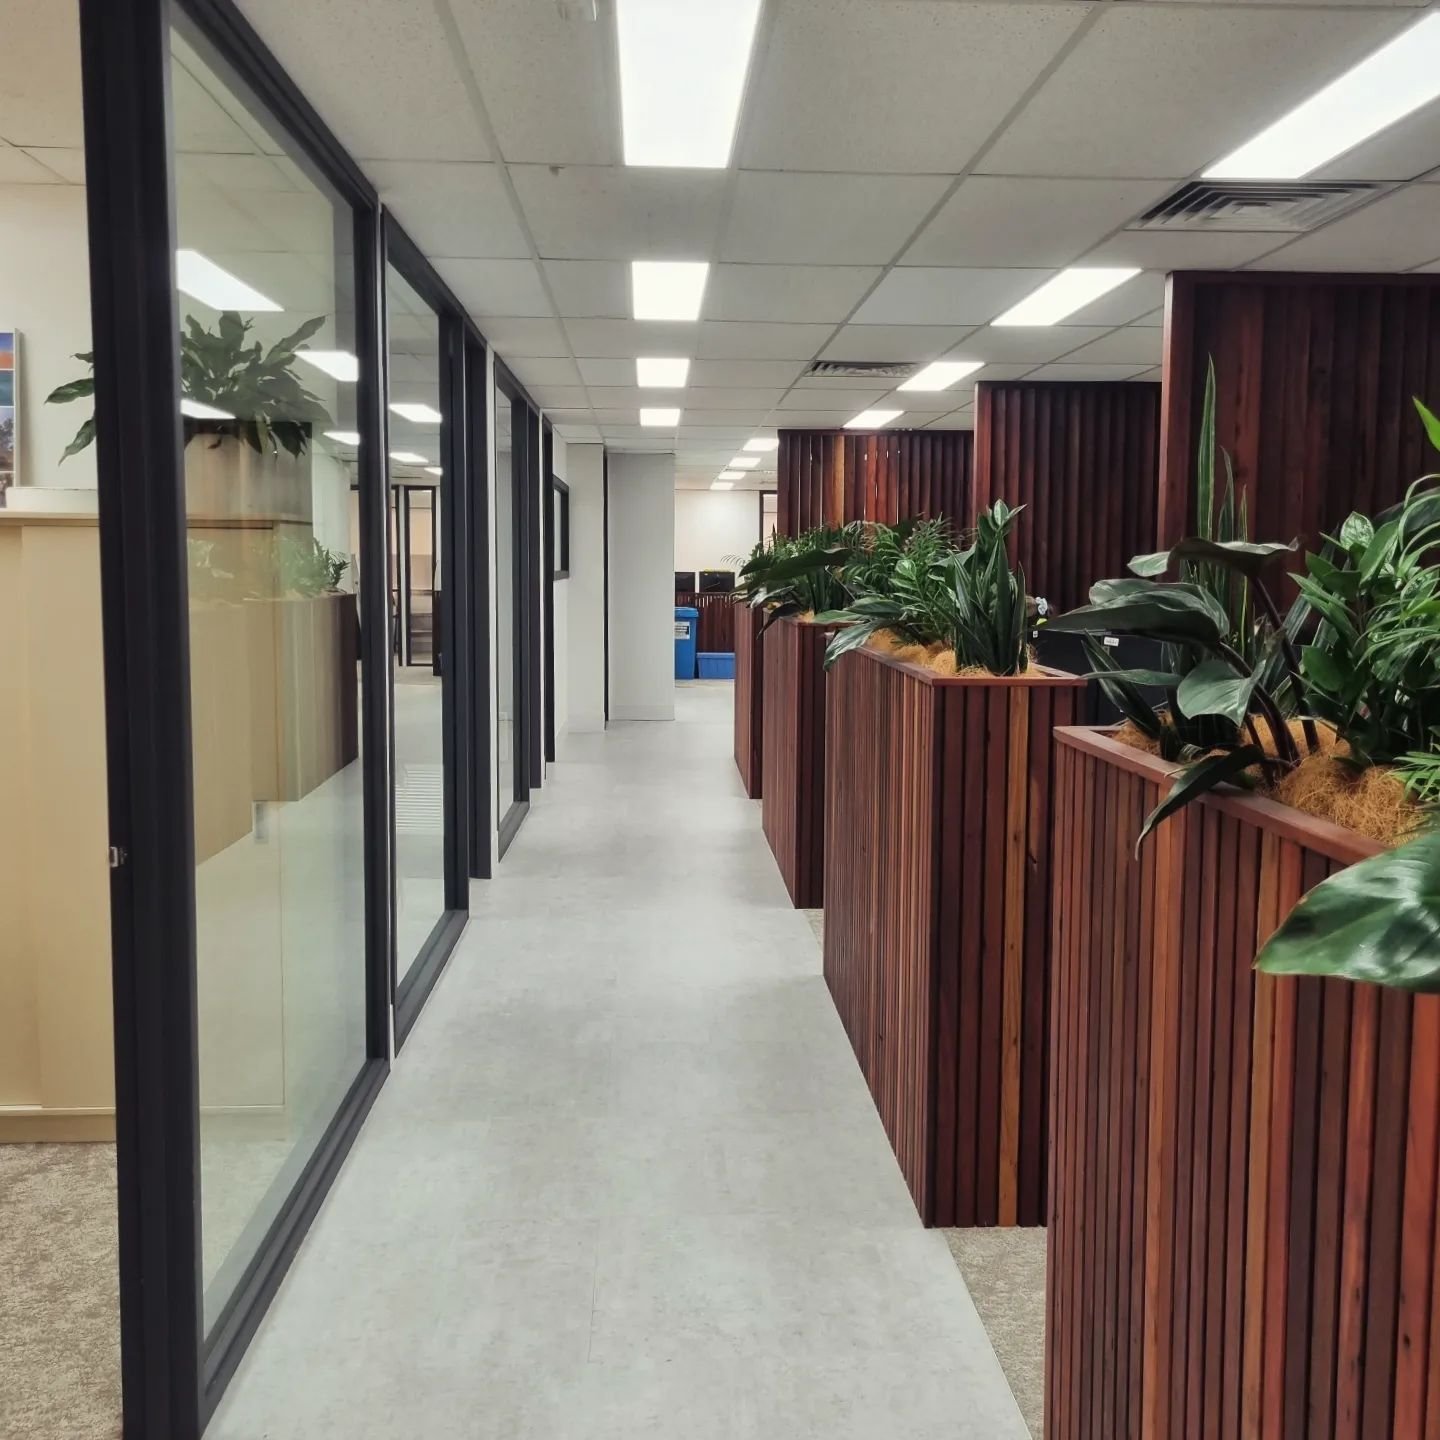 It was such a pleasure to visit this office space that we designed and have watched come together over the last year. The texture, soft colours, and natural elements make for a calm and inviting interiors. We are so happy with how  this commercial pr